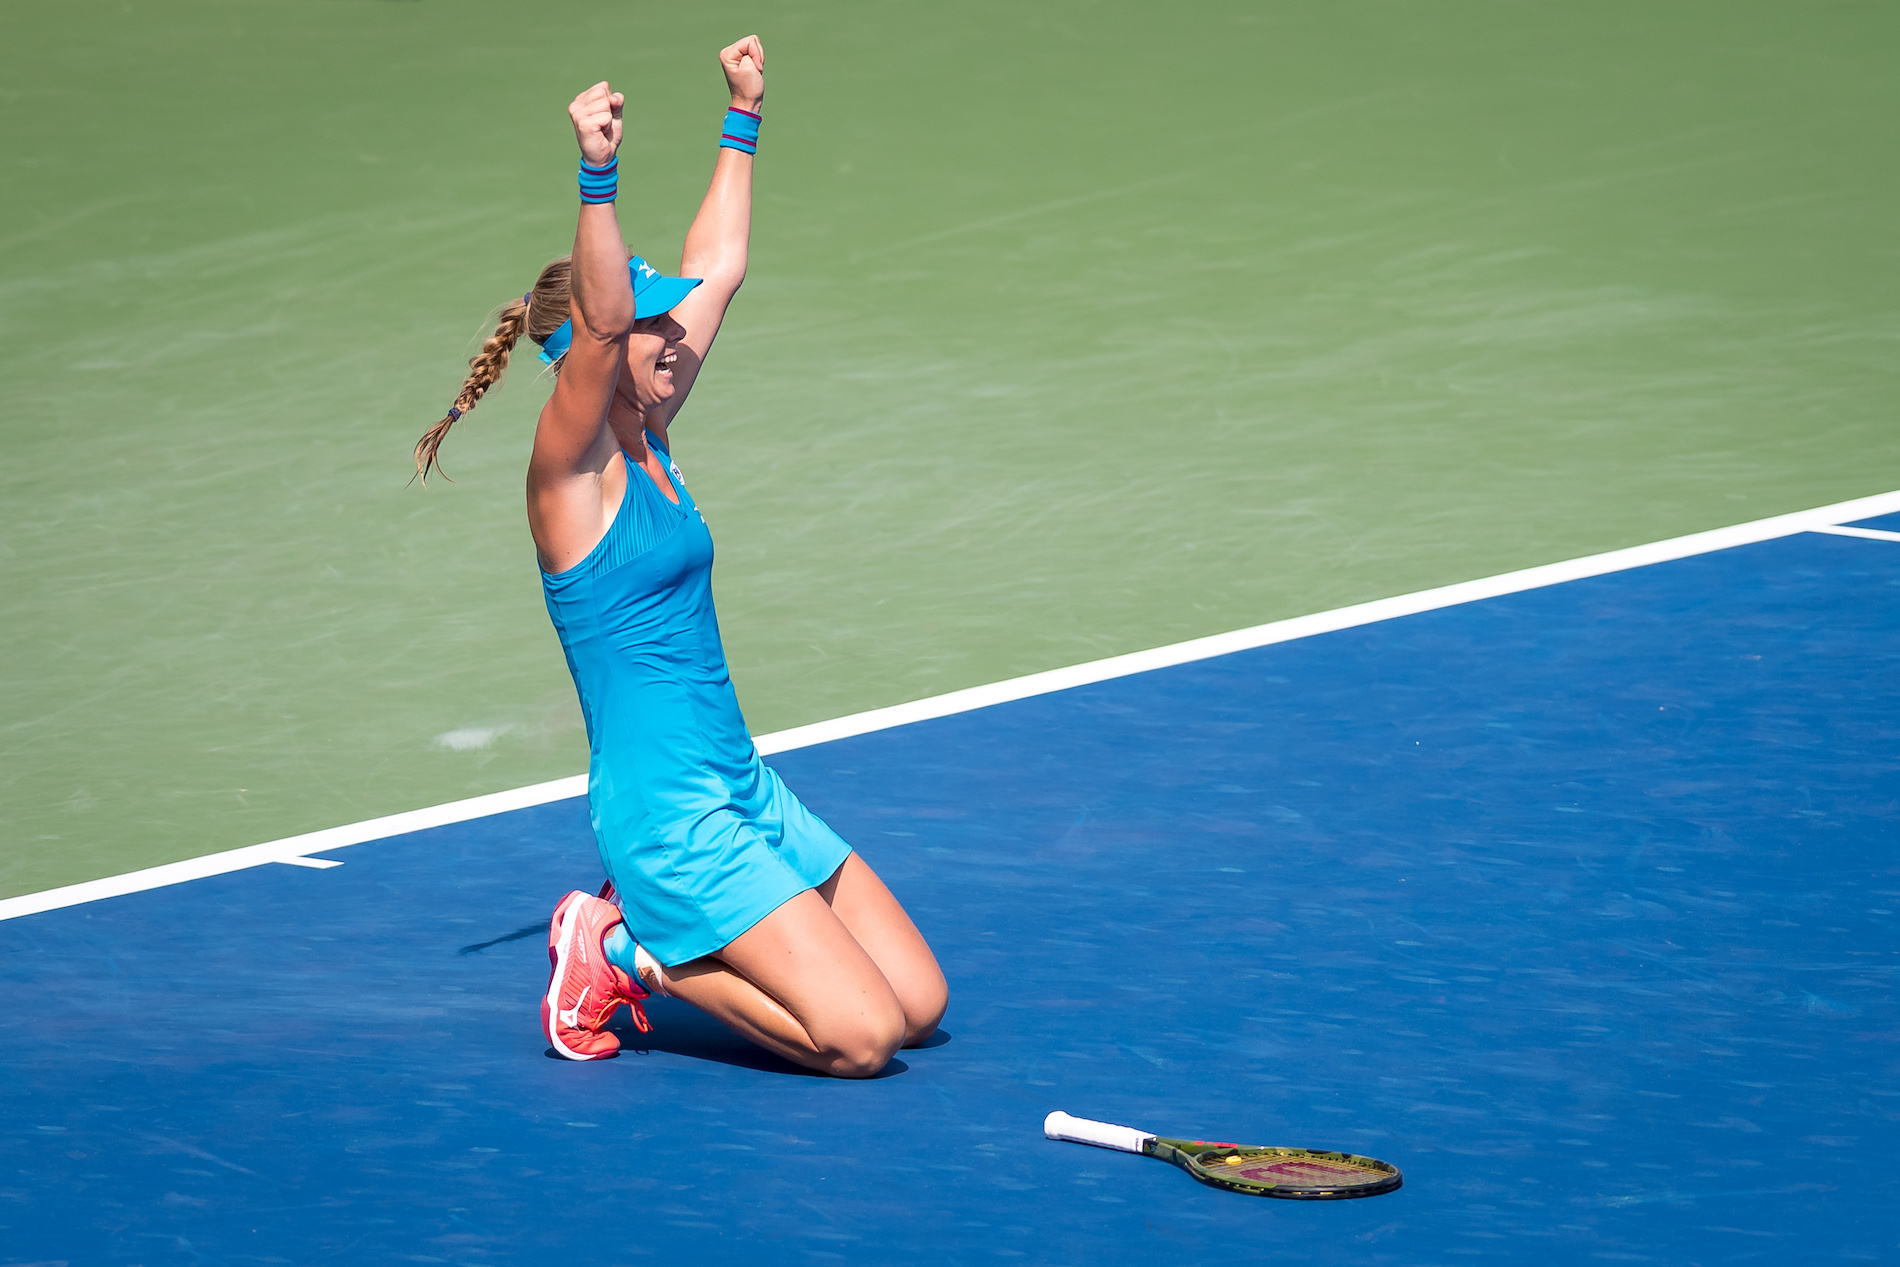 woman celebrating on the tennis court